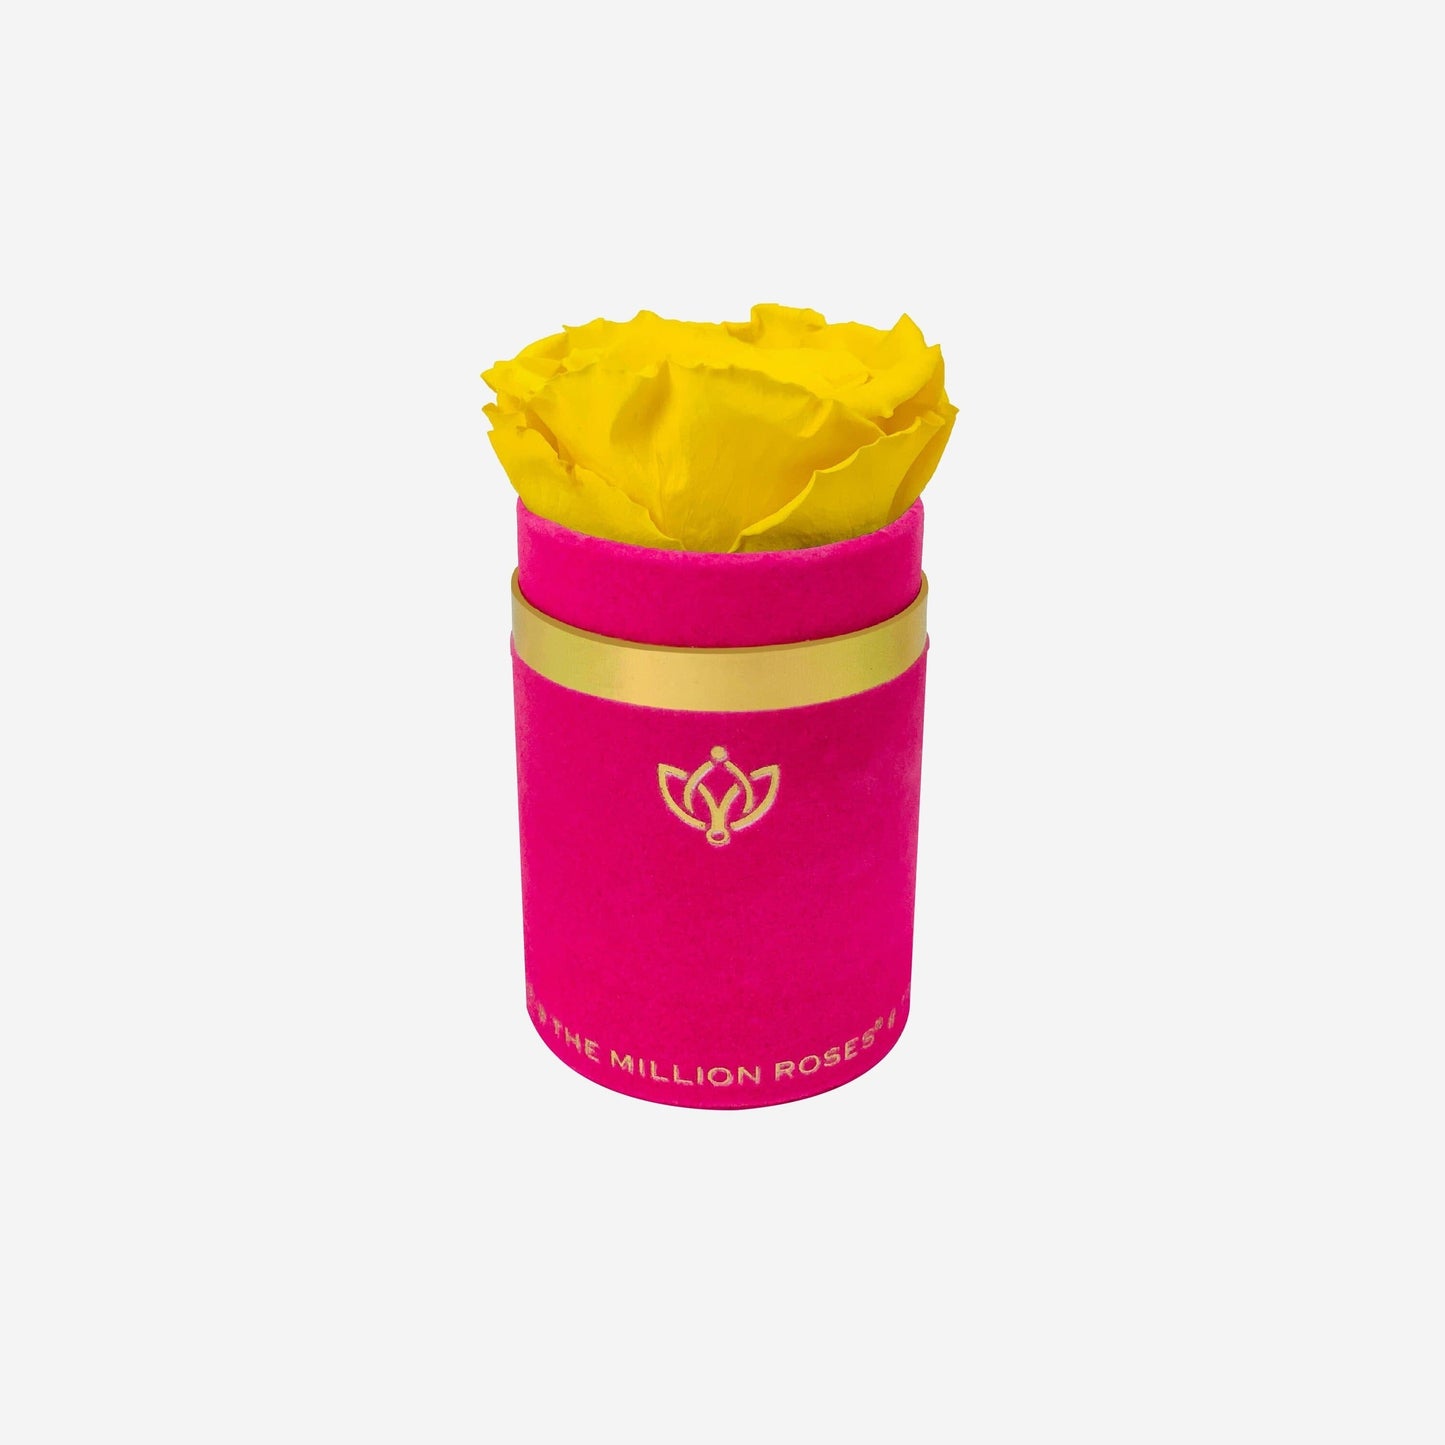 Single Hot Pink Suede Box | Yellow Rose - The Million Roses